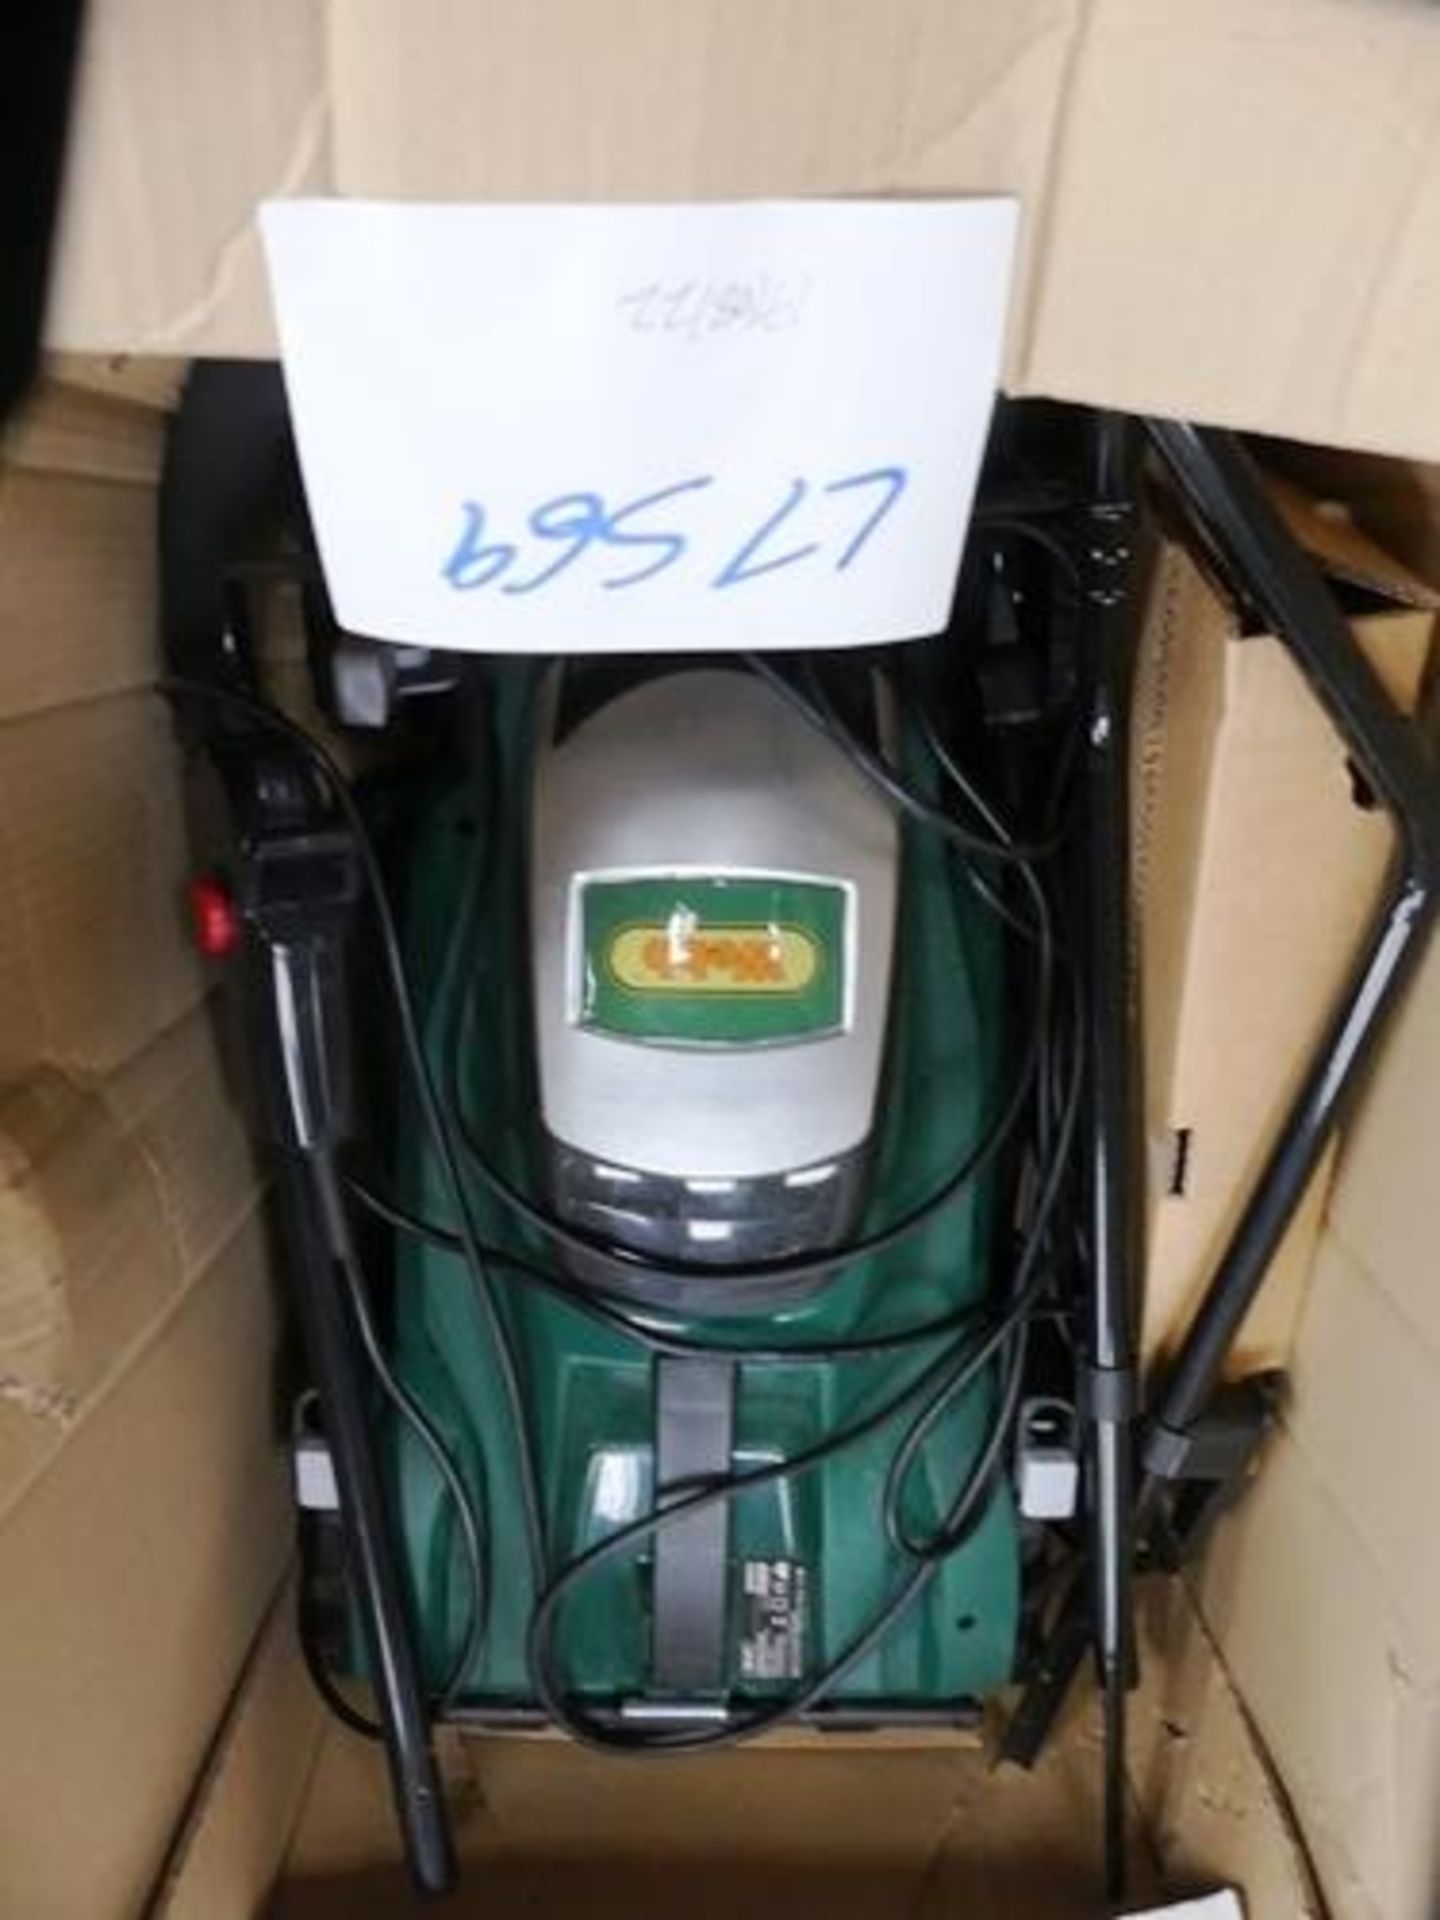 1 x Qualcast power trak 3400 electric mower and 1 x MacAllister electric mower - Second hand and